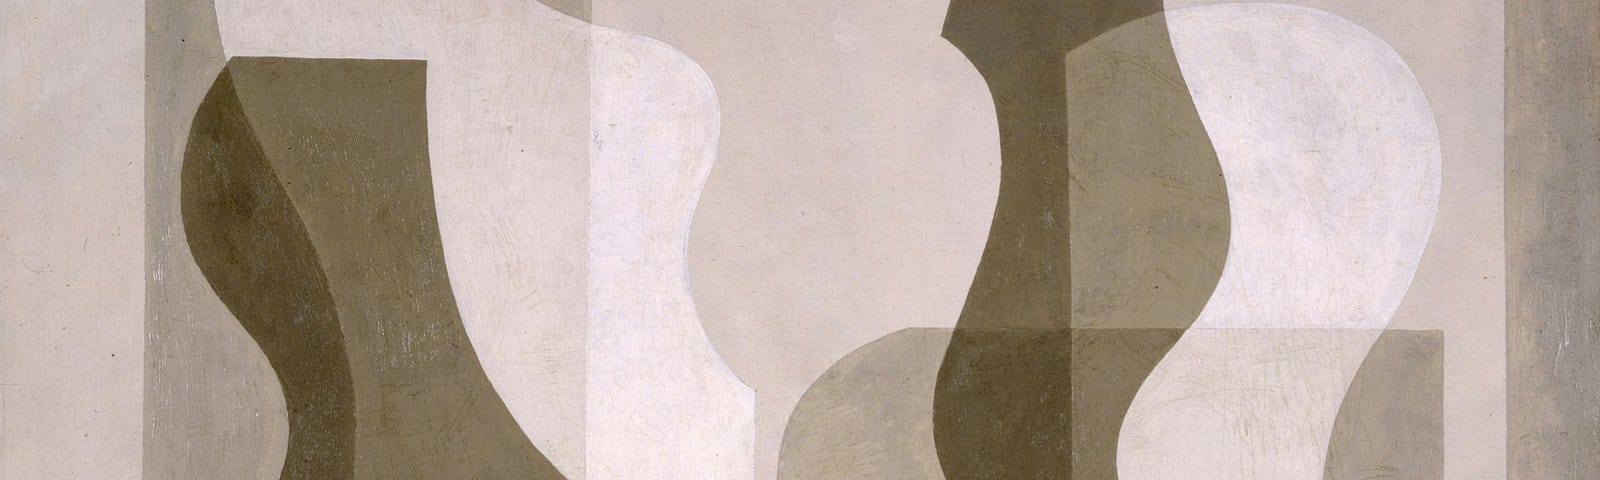 A painting featuring a collection of vague gray and white shapes overlaying each other on a gray background.